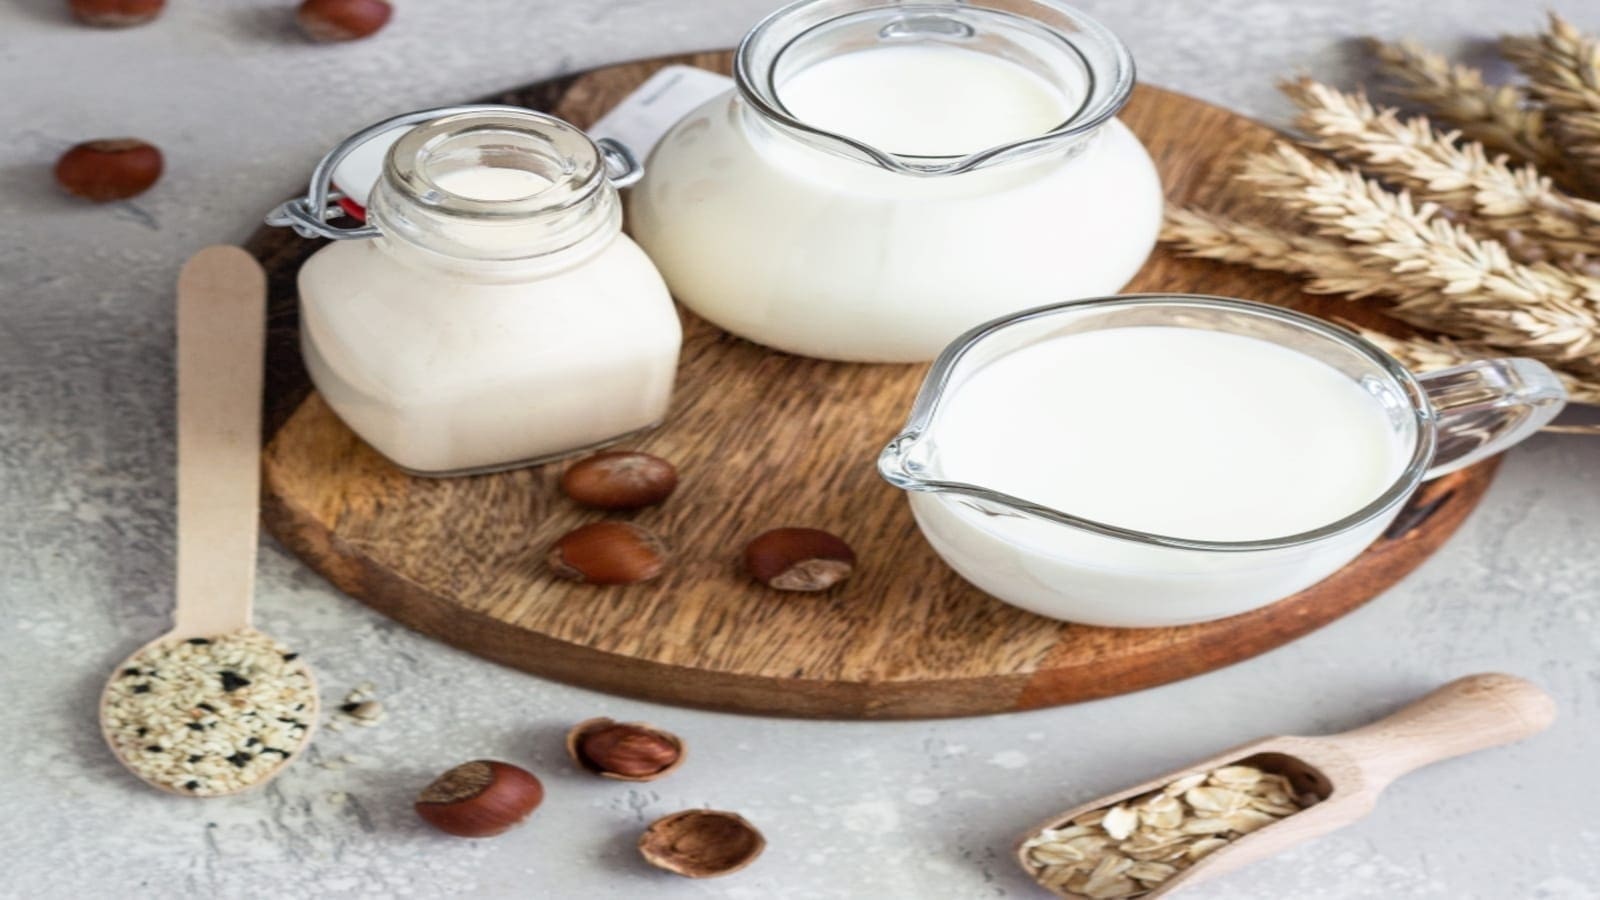 Prinova launches new premixes to help manufacturers produced high quality plant-based dairy products